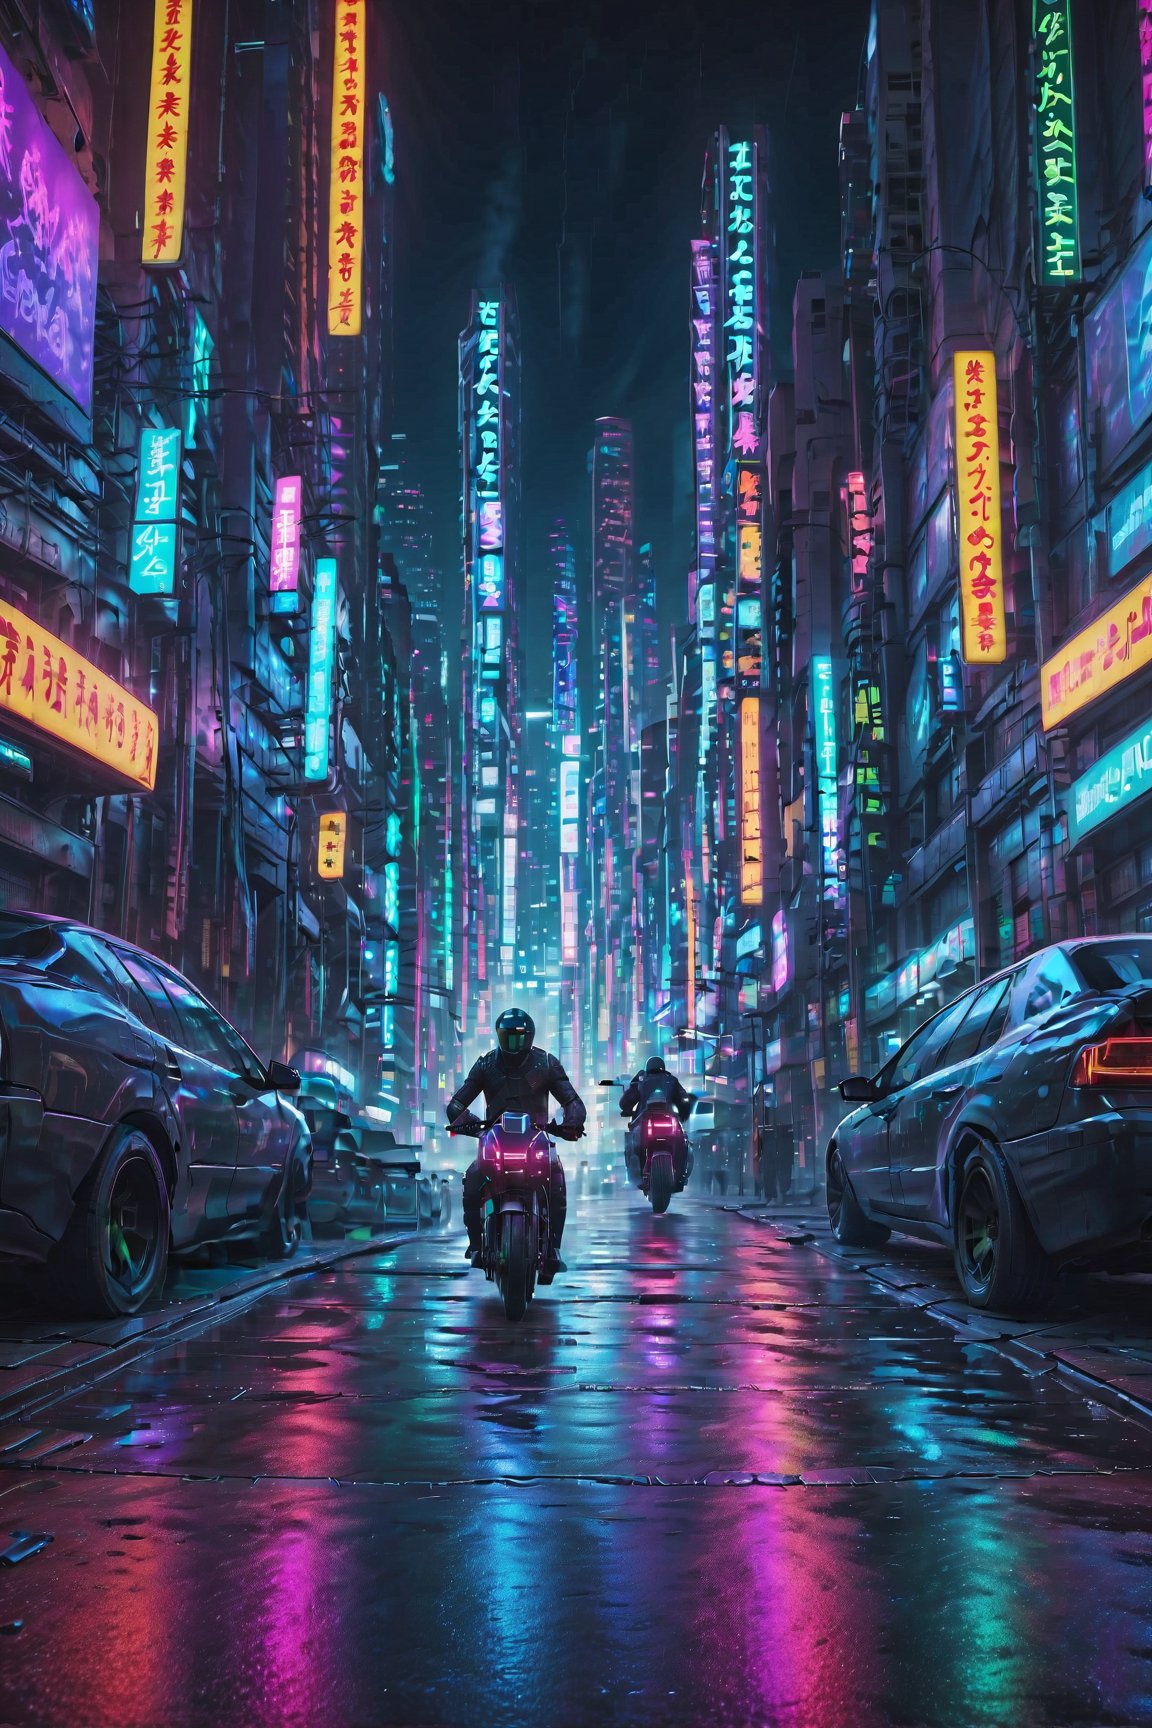 best quality,4k,8k,highres,masterpiece:1.2,ultra-detailed,realistic:1.37,cyberpunk,landscape,neon lights,dystopian city,high-tech bike,futuristic,glowing,chrome finish,sleek design,nighttime,urban environment,fast-moving,blurry lights,reflection,street racing,shadows,flyover bridge,graffiti art,retrofuturistic,sci-fi elements,dark alleyway,dangerous vibe,exciting atmosphere,exhaust fumes,adrenaline rush,heavy traffic,advanced technology,hovering,electric power,energy beams,cityscape,aurora borealis effect,shimmering colors,breath-taking,immersive experience